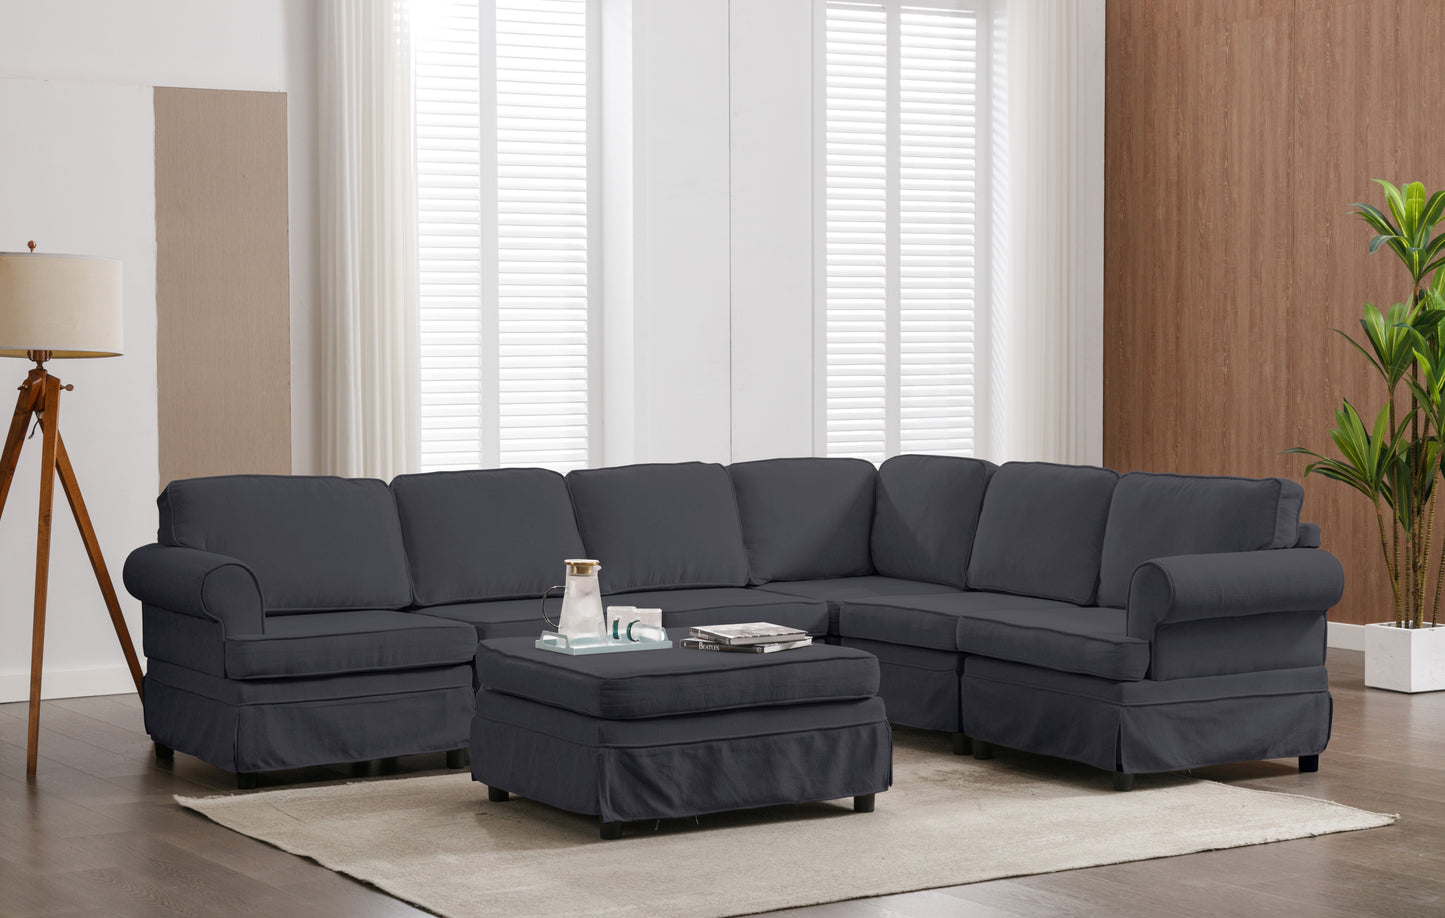 108.6 Customizable Fabric Upholstered Modular Sectional Sofa with Ottoman, Gray Living Room Couch